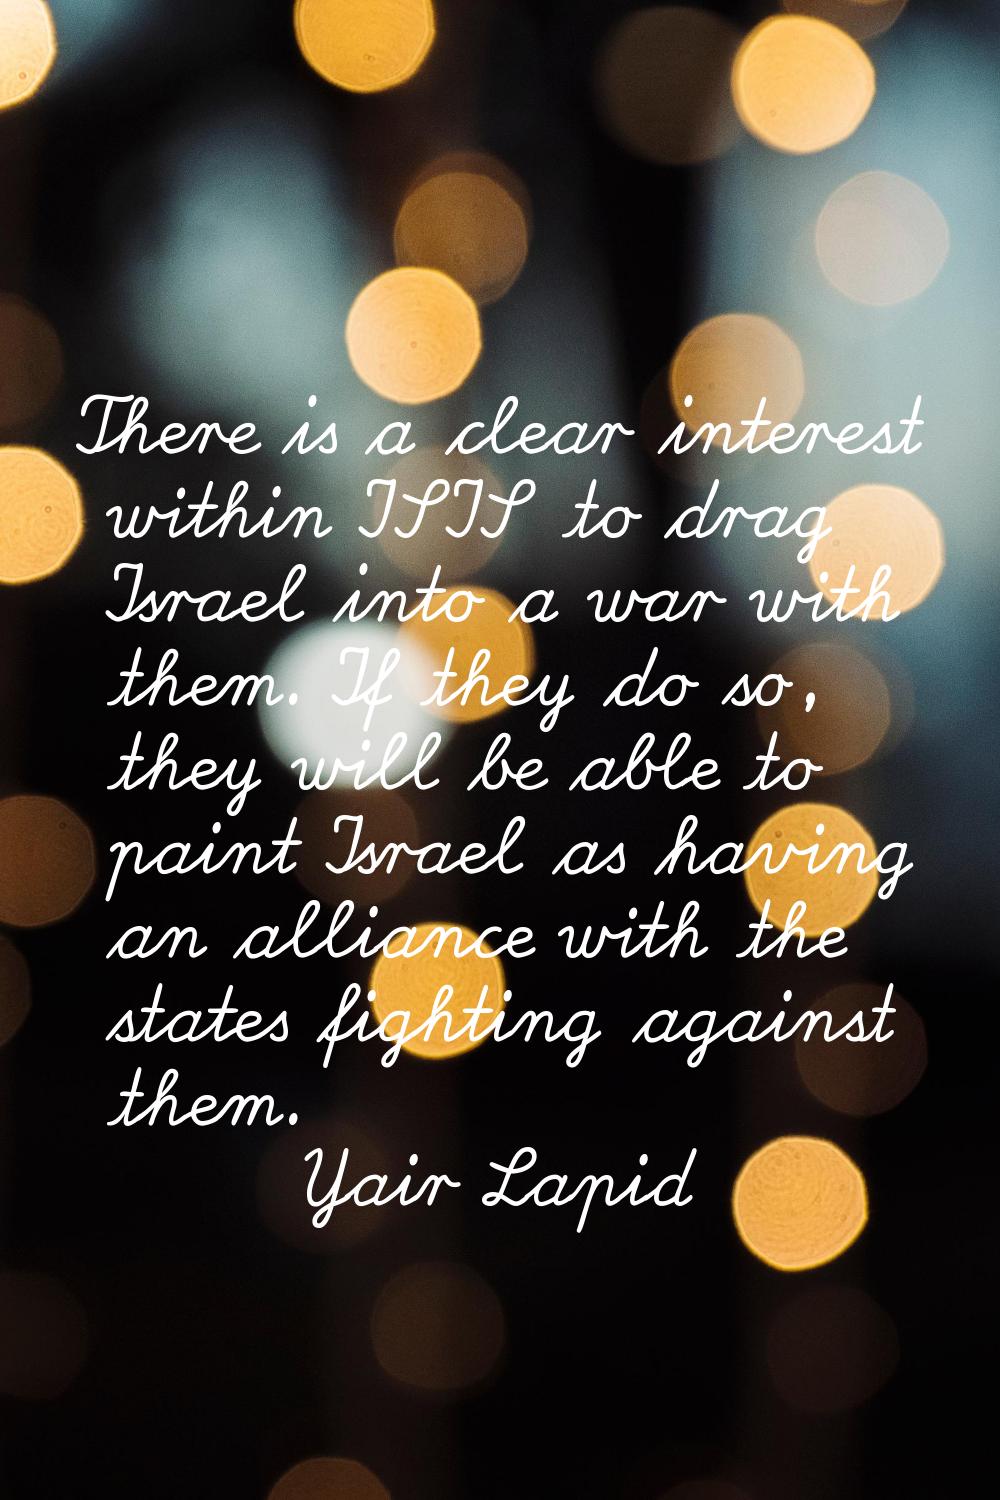 There is a clear interest within ISIS to drag Israel into a war with them. If they do so, they will